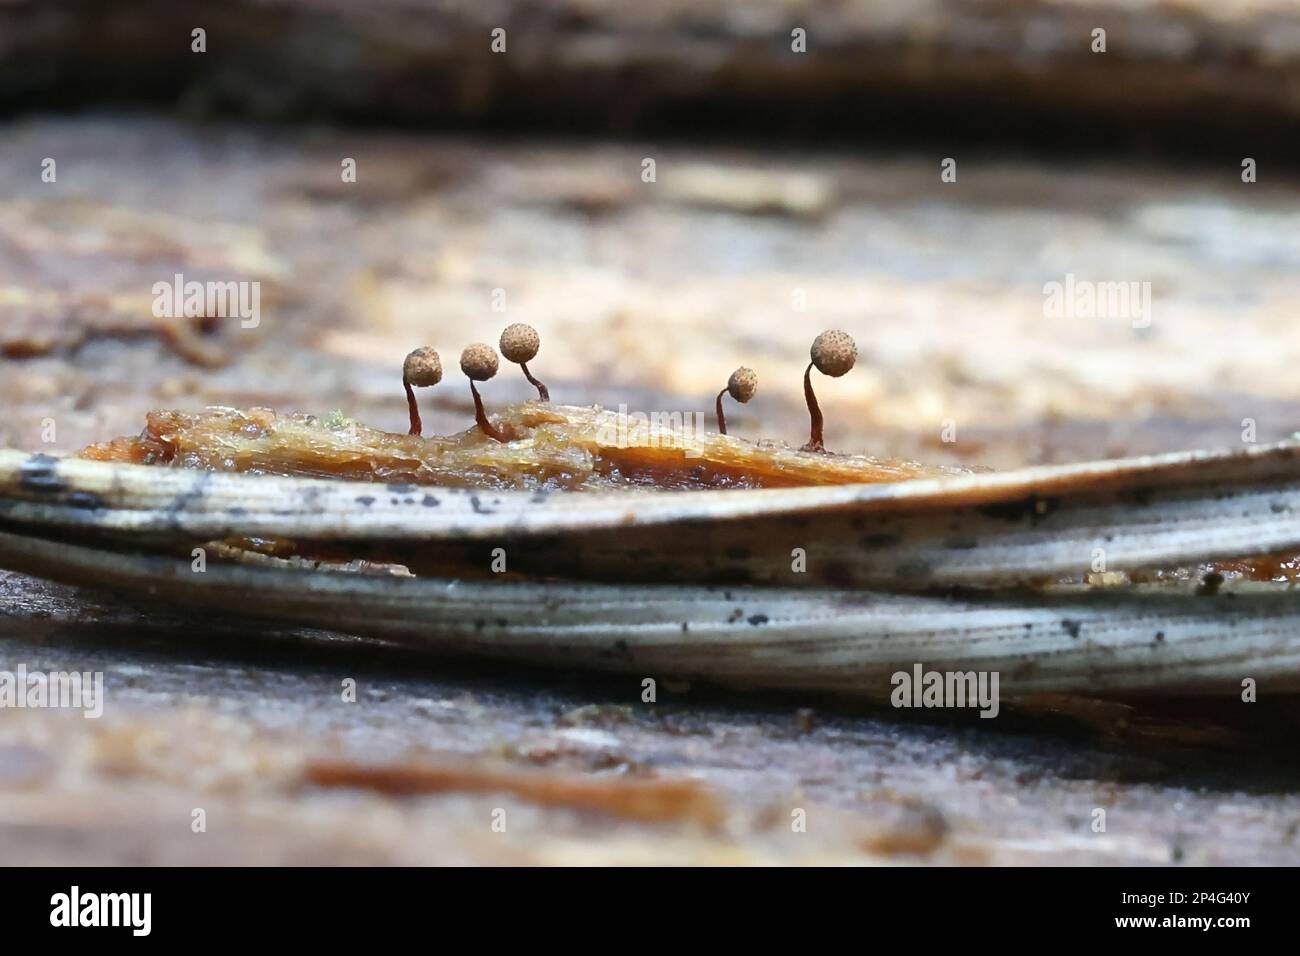 Cribraria persoonii, a slime mold from Finland, no common English name Stock Photo